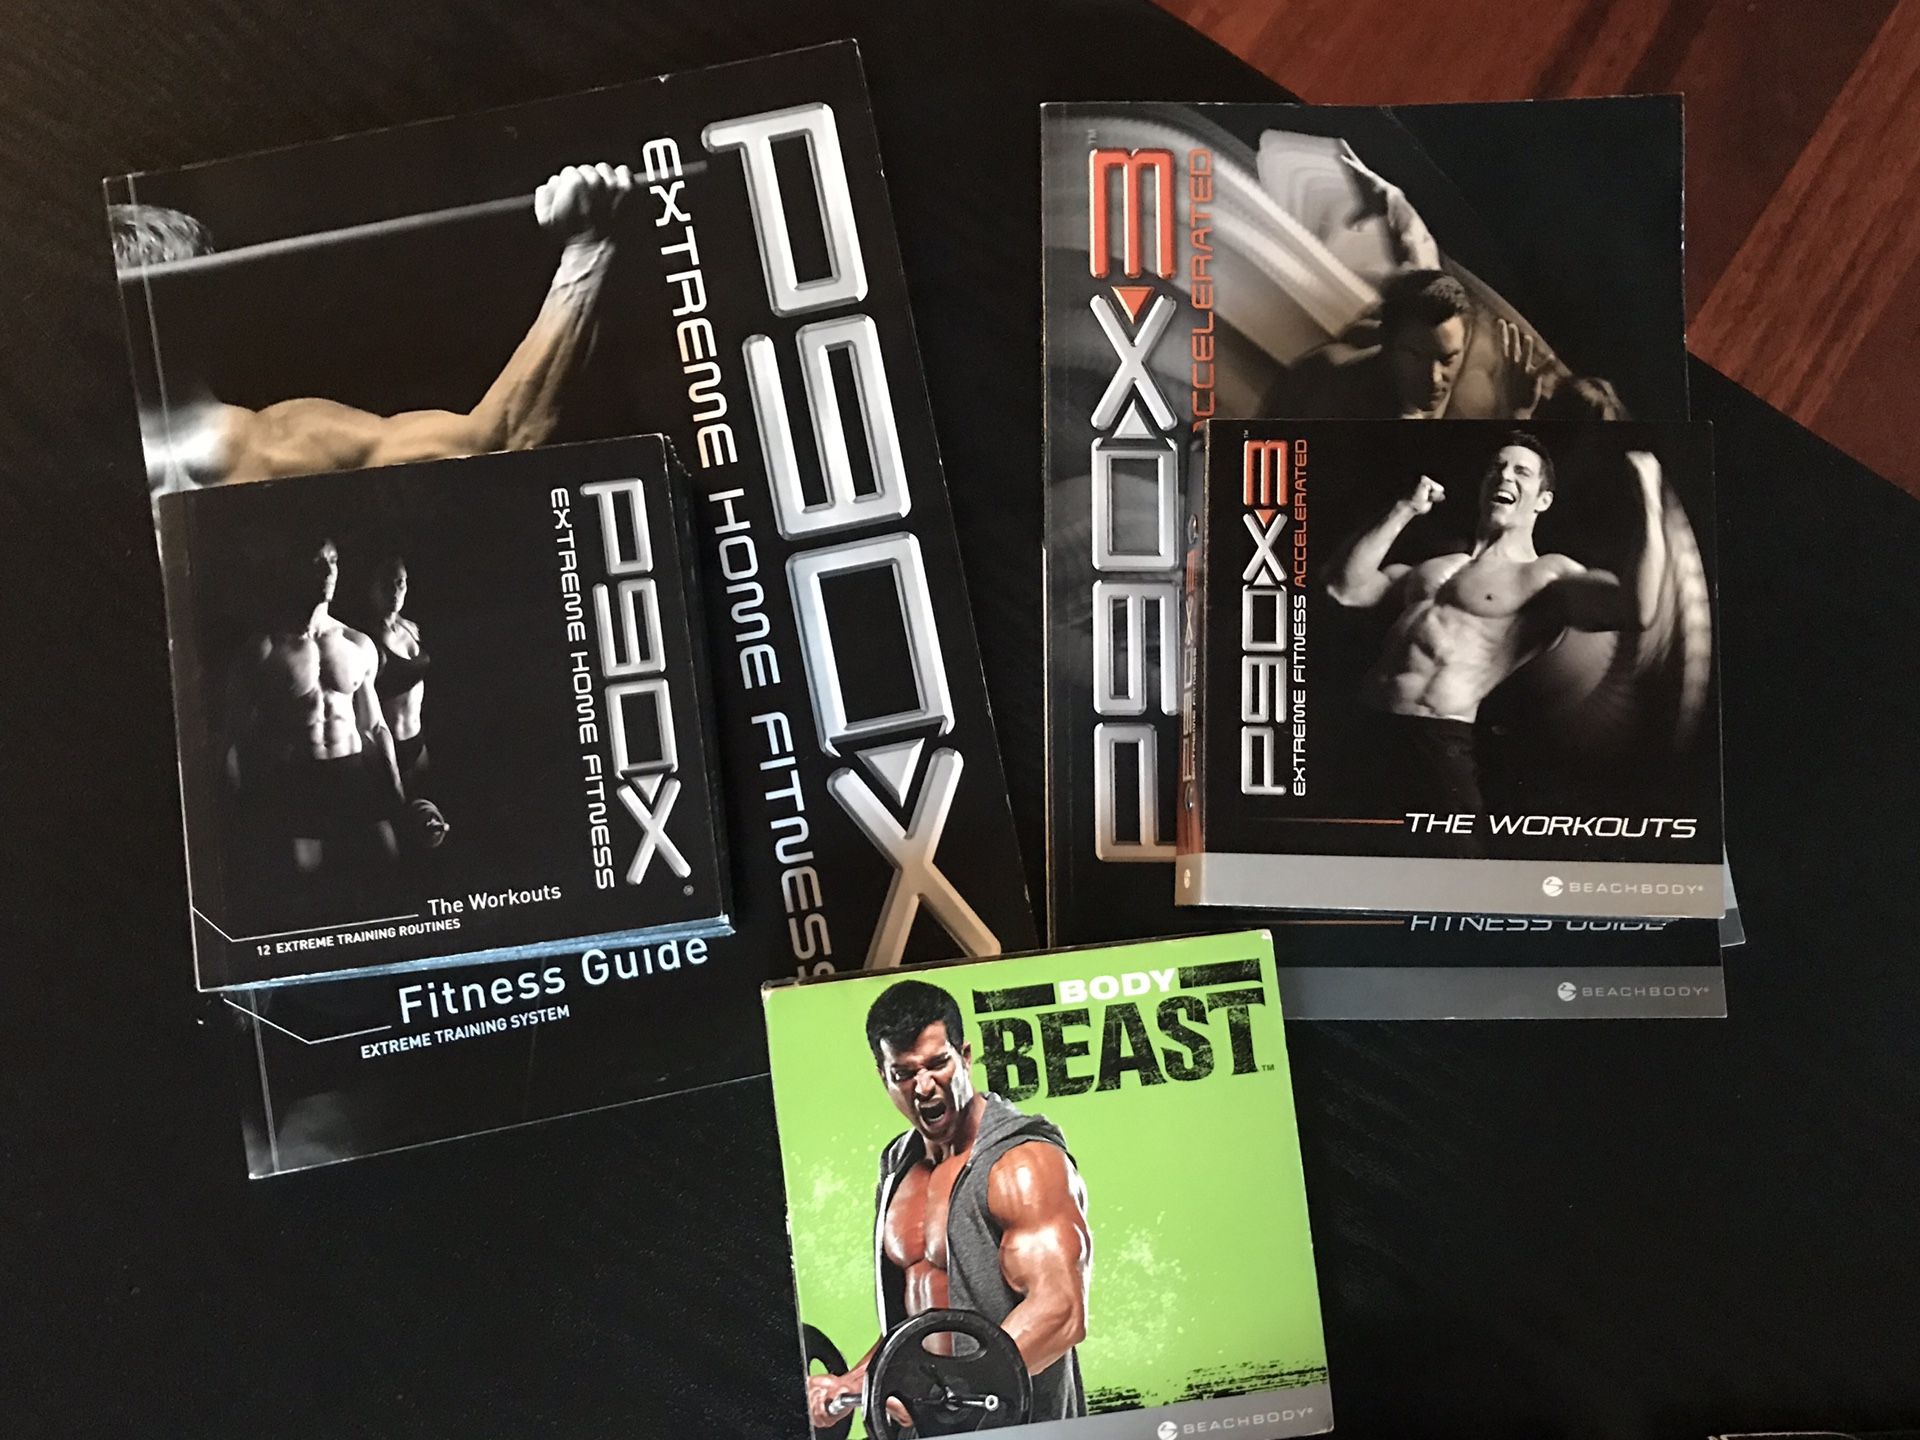 New Years resolutions? Get fit with Beach body DVD lot.